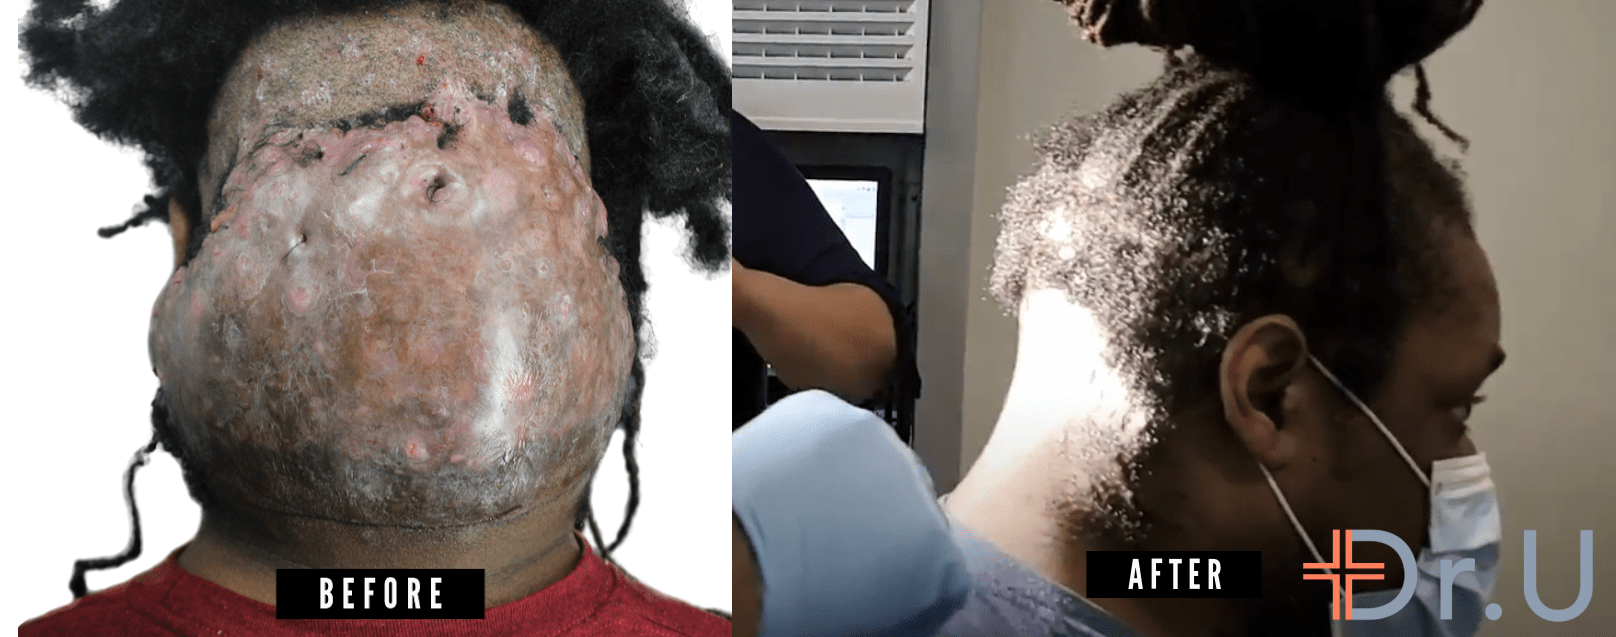 Before and after images showing patient's initial class III, tumorous mass presentation, compared to his final smooth appearance on the back of his head